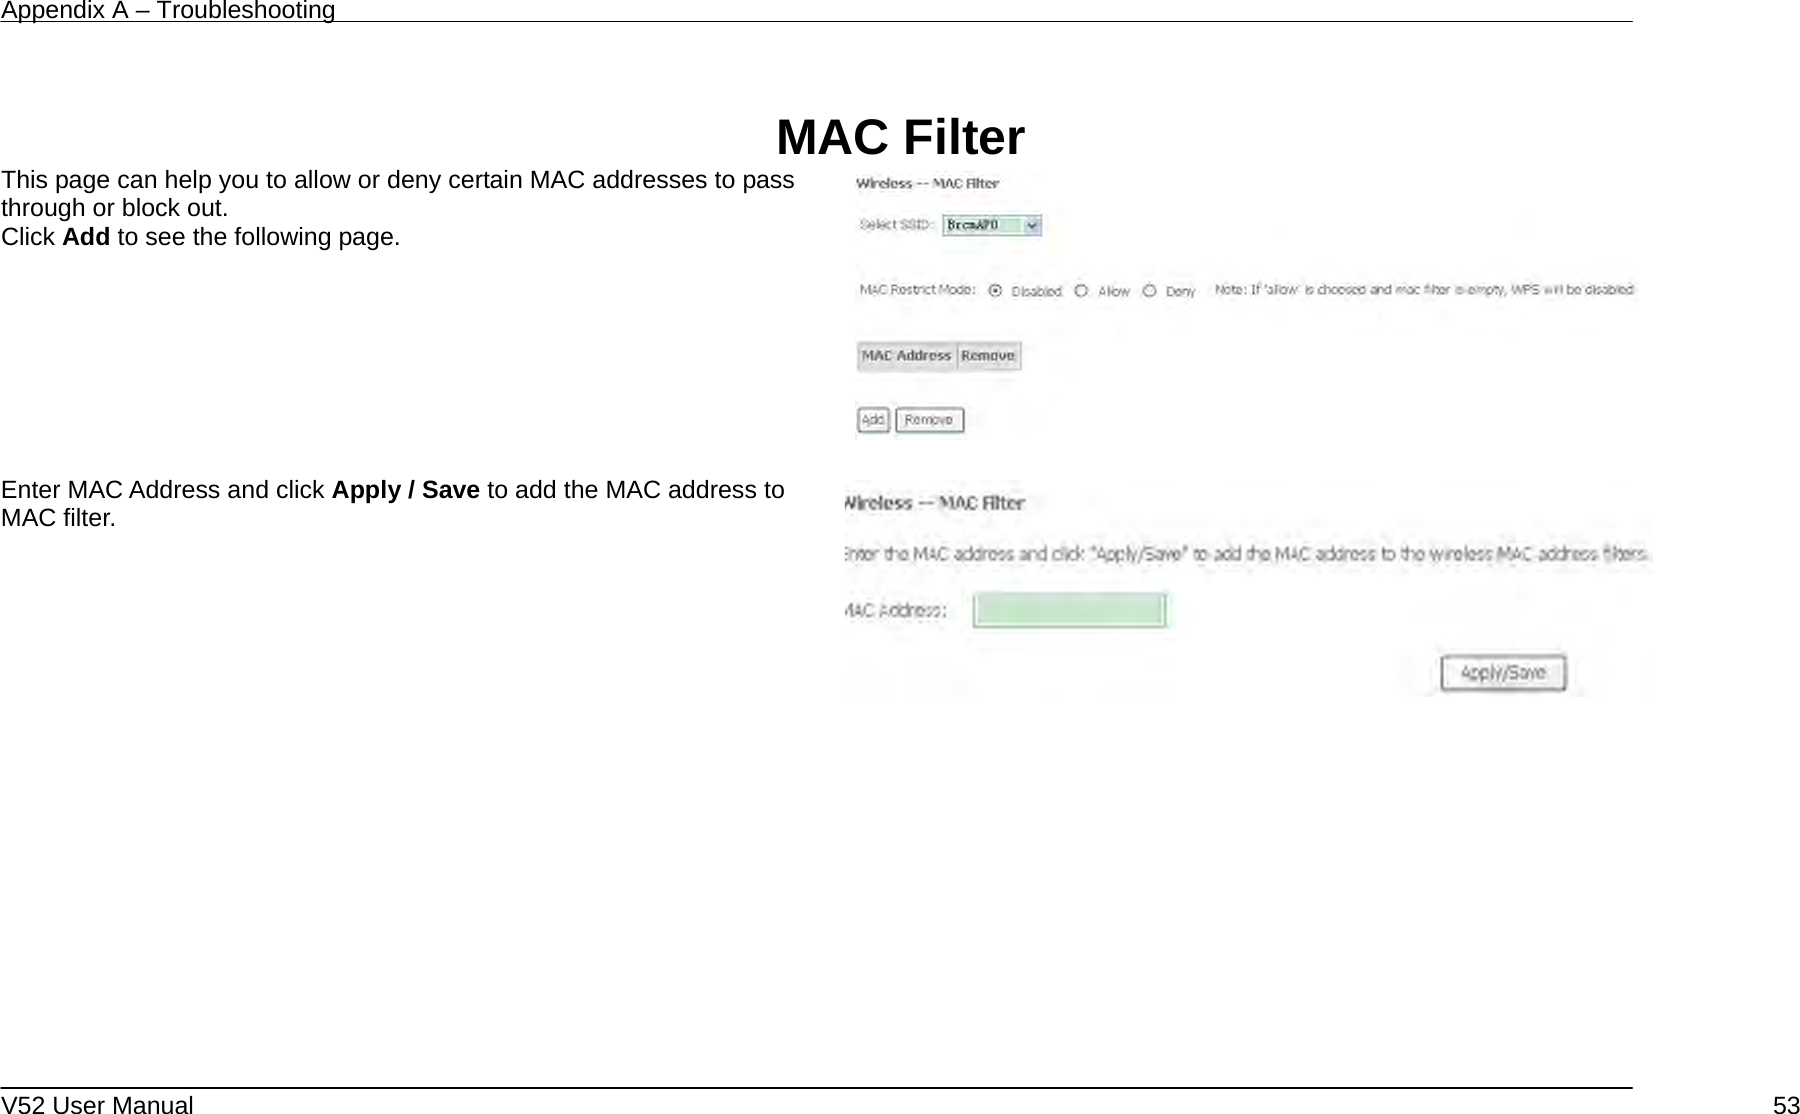 Appendix A – Troubleshooting   V52 User Manual    53 MAC Filter This page can help you to allow or deny certain MAC addresses to pass through or block out. Click Add to see the following page.    Enter MAC Address and click Apply / Save to add the MAC address to MAC filter.     